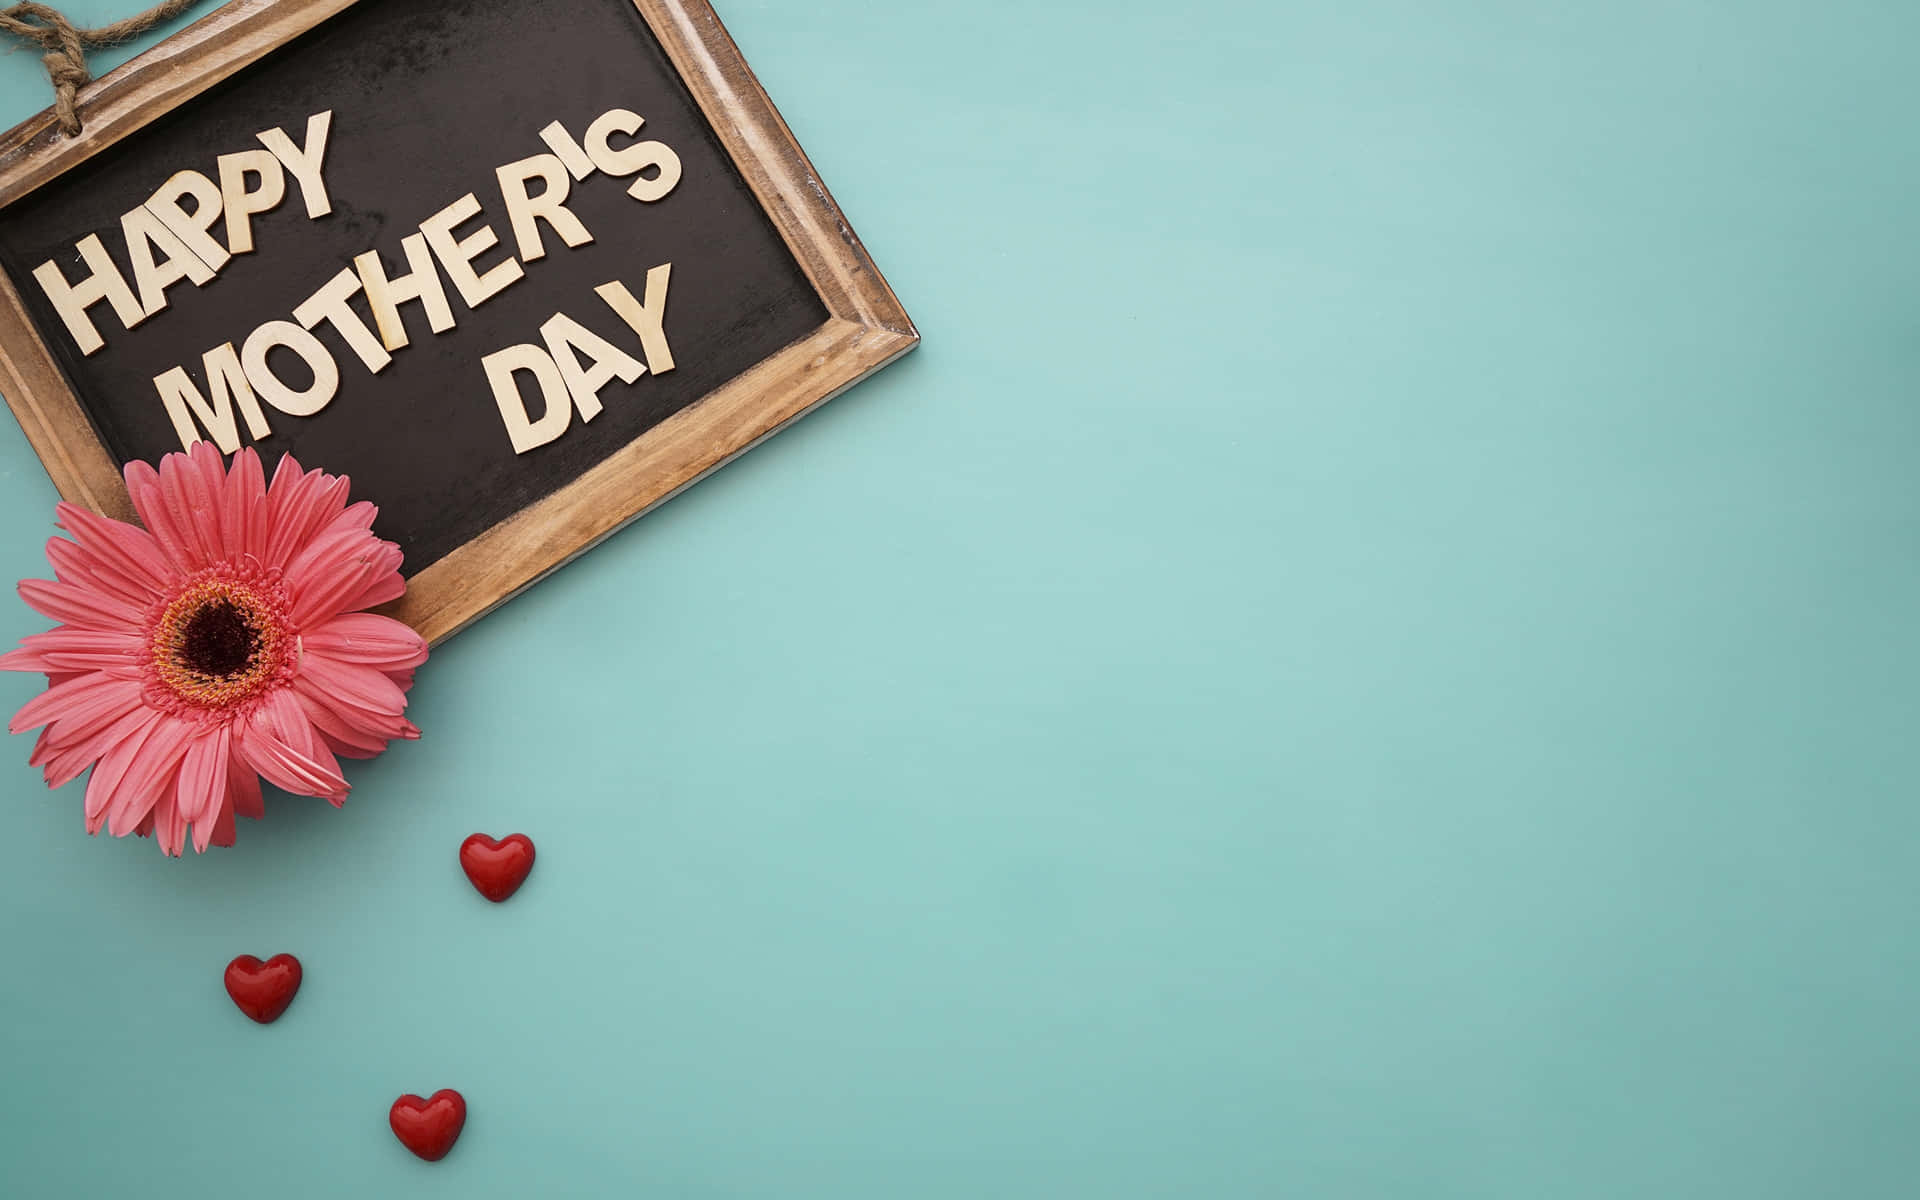 Wishing you a Happy Mother's Day!